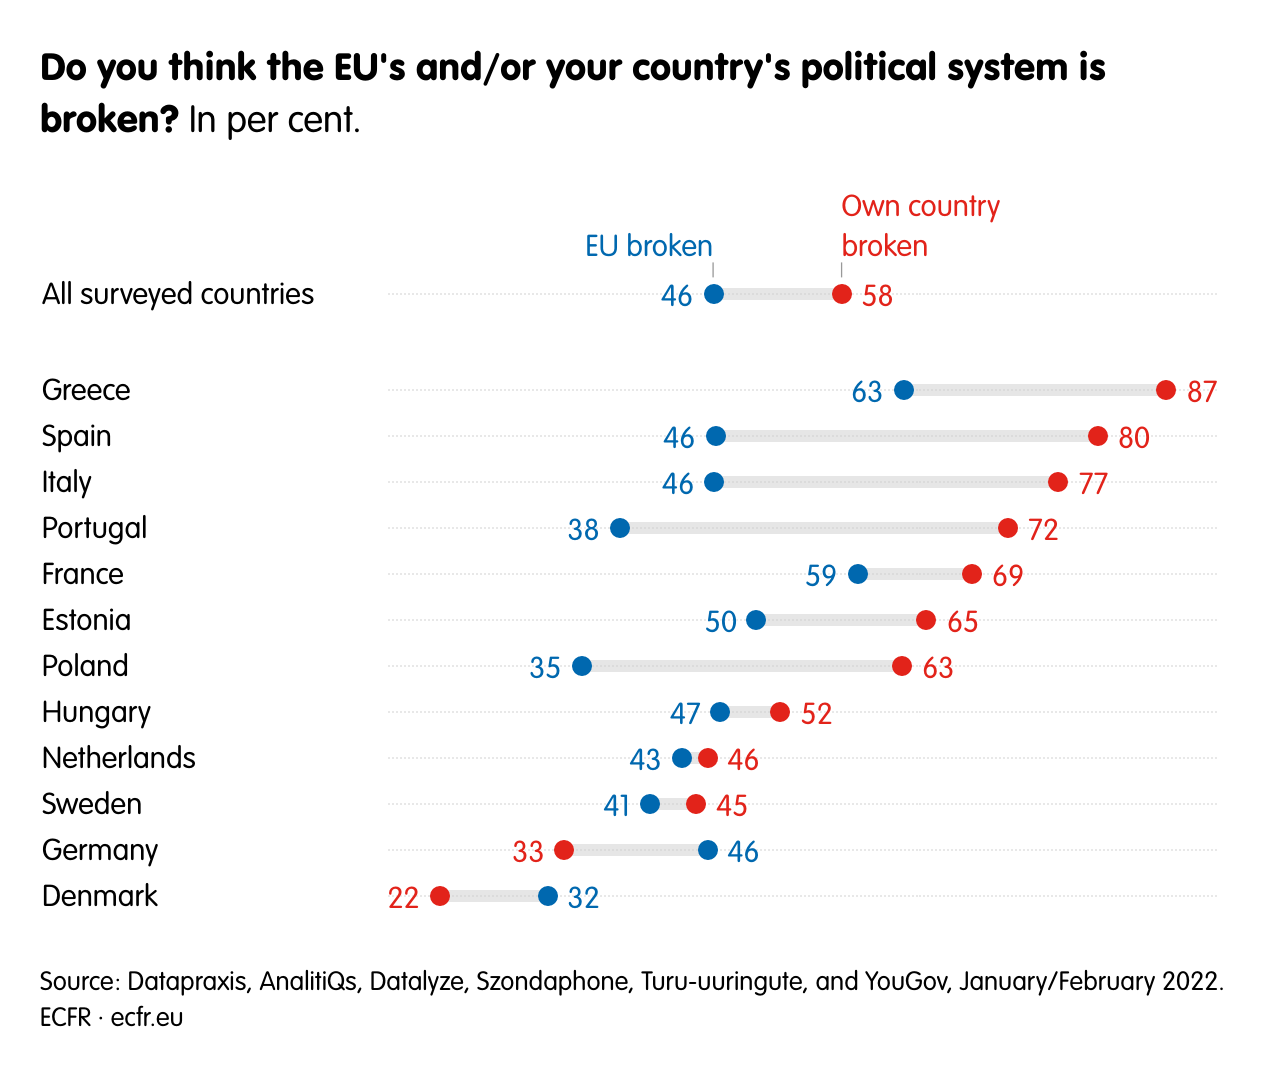 Do you think the EU's and/or your country's political system is broken?